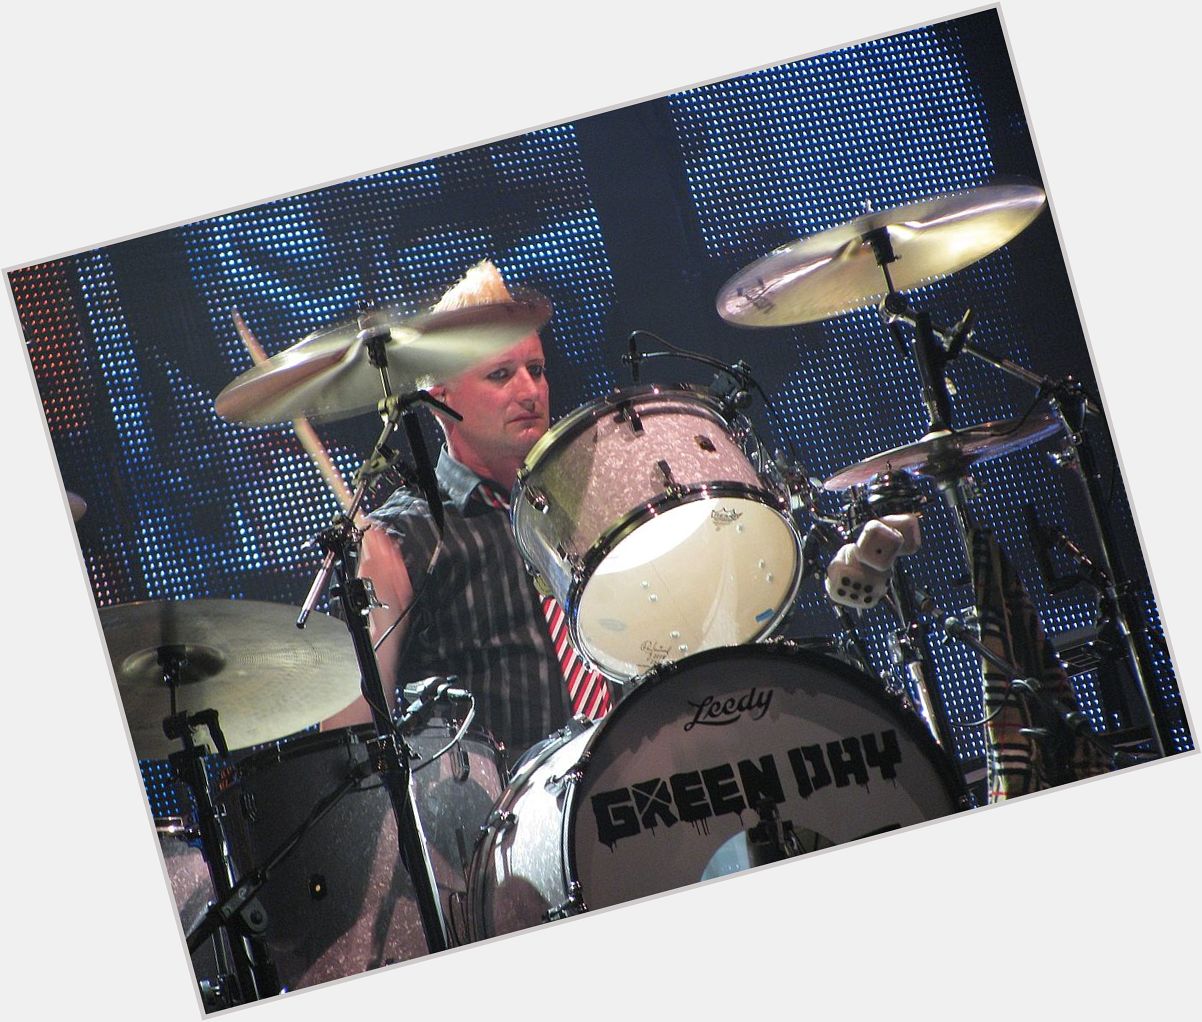 Happy 42nd birthday, Frank Wright III best known as Tré Cool, drummer for Green Day  Boulevard 